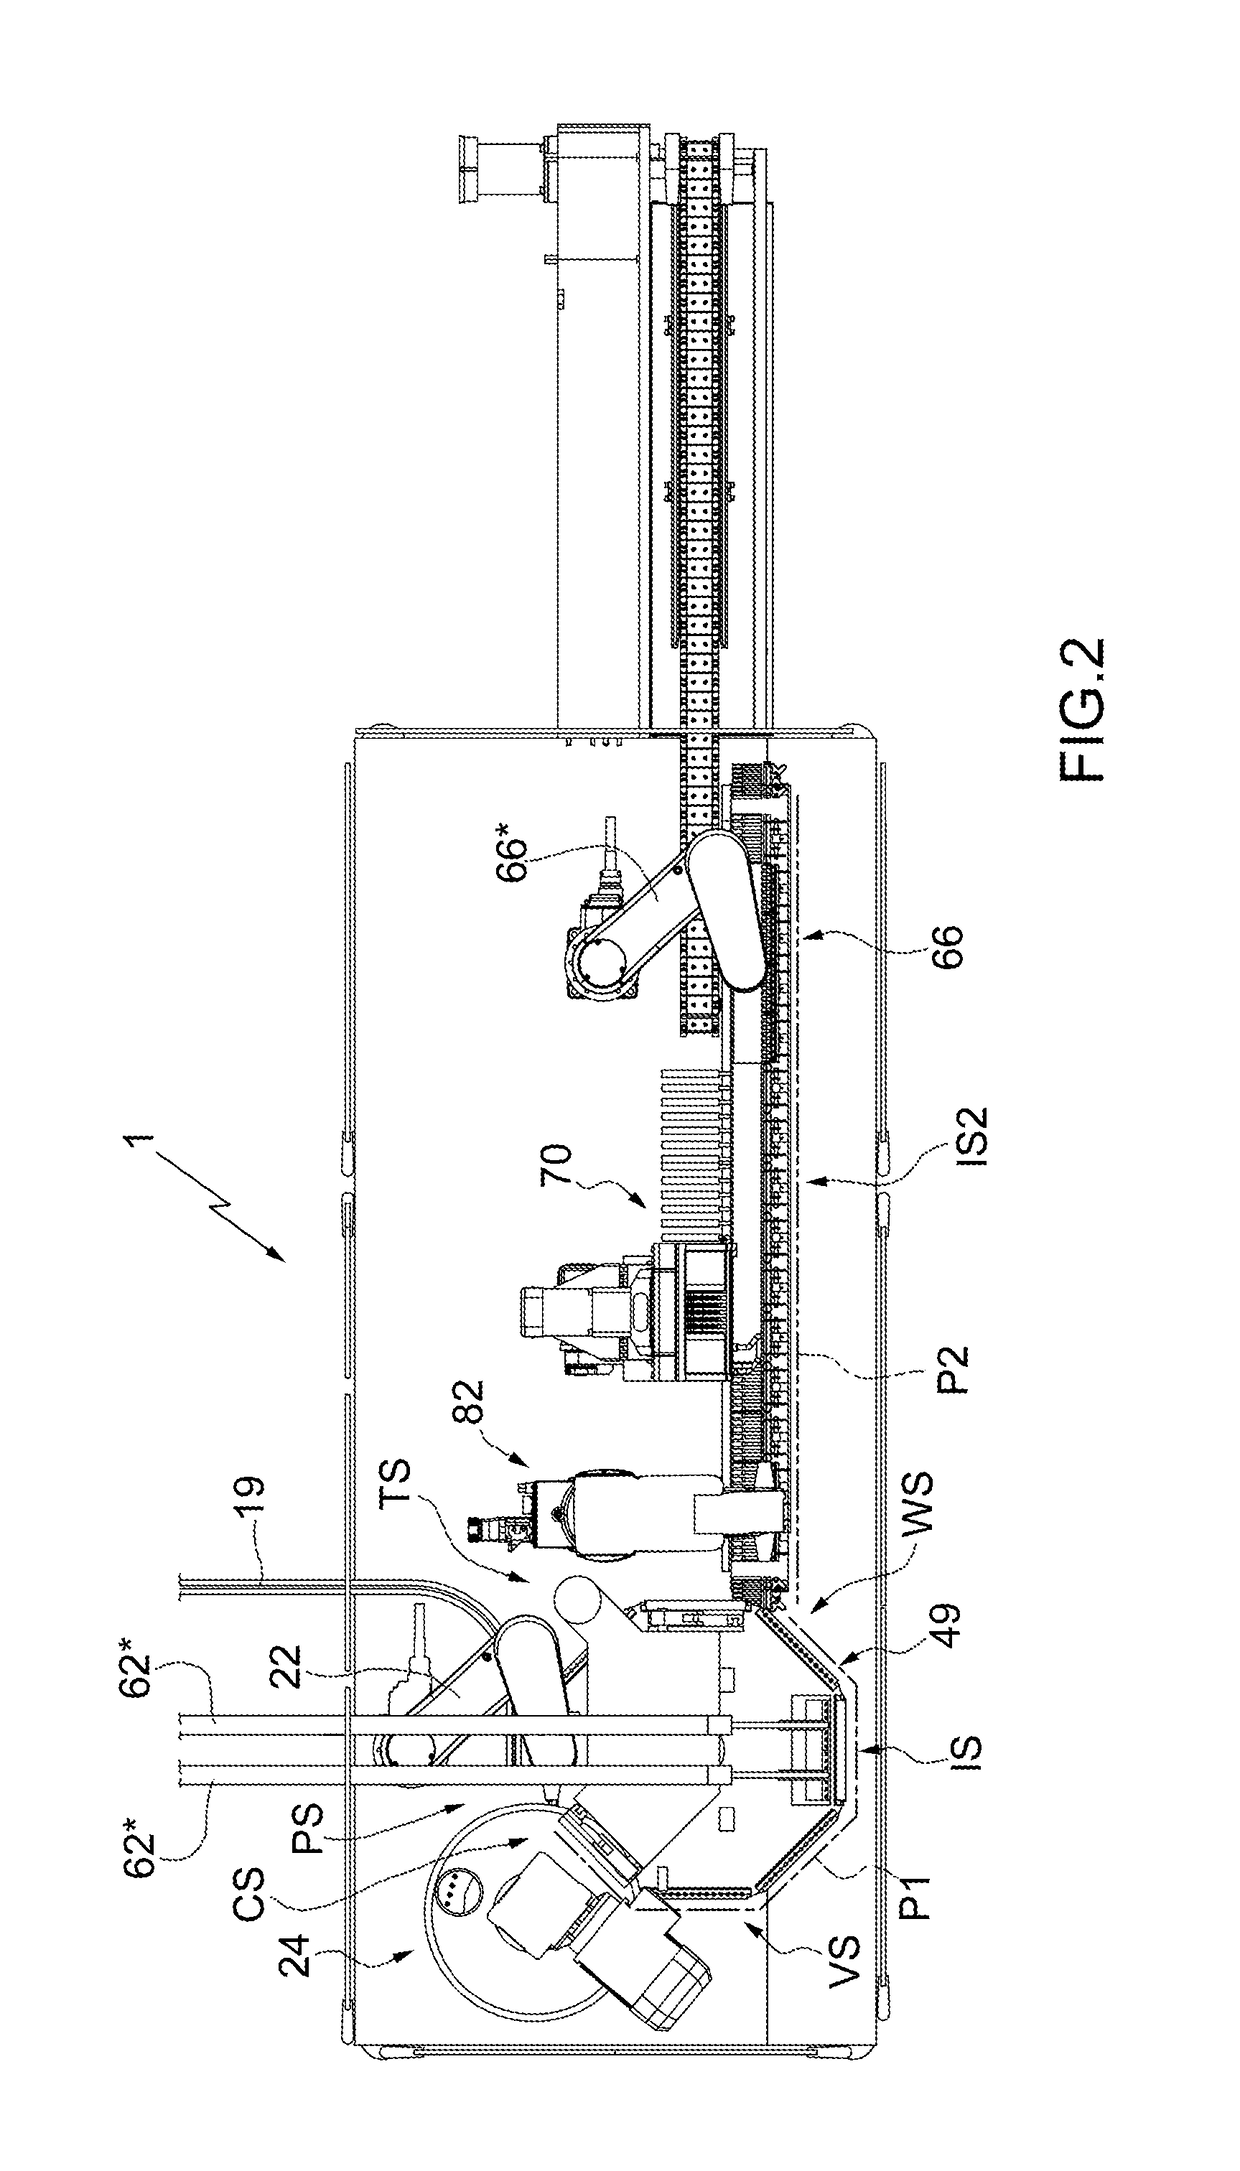 Machine for Producing Substantially Cylindrical Articles